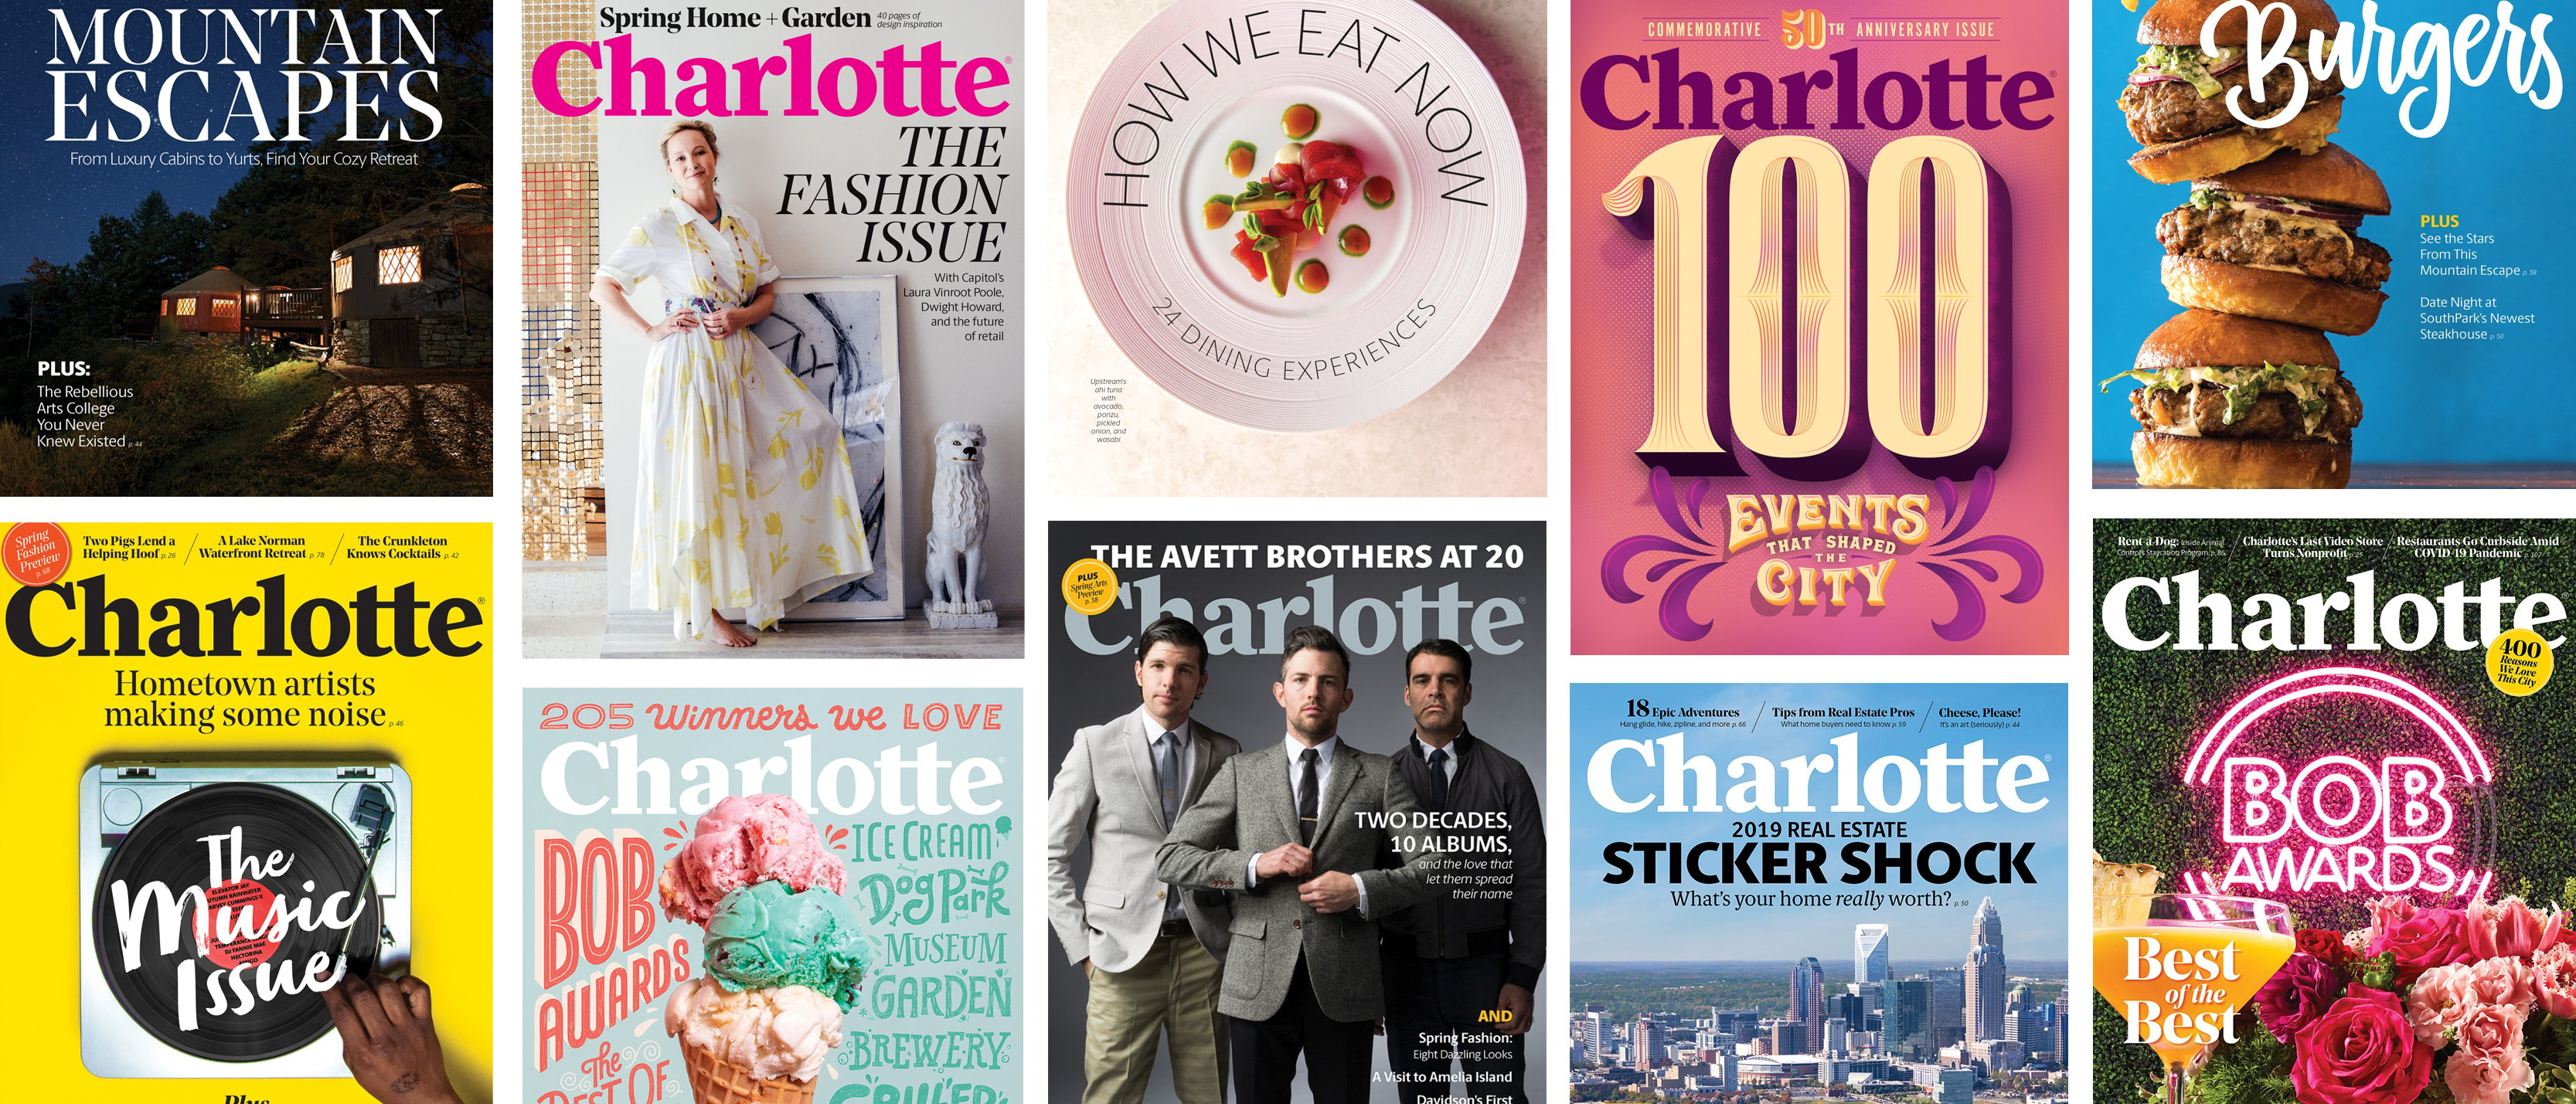 Charlotte Magazine Names Andy Smith as New Publisher - Charlotte